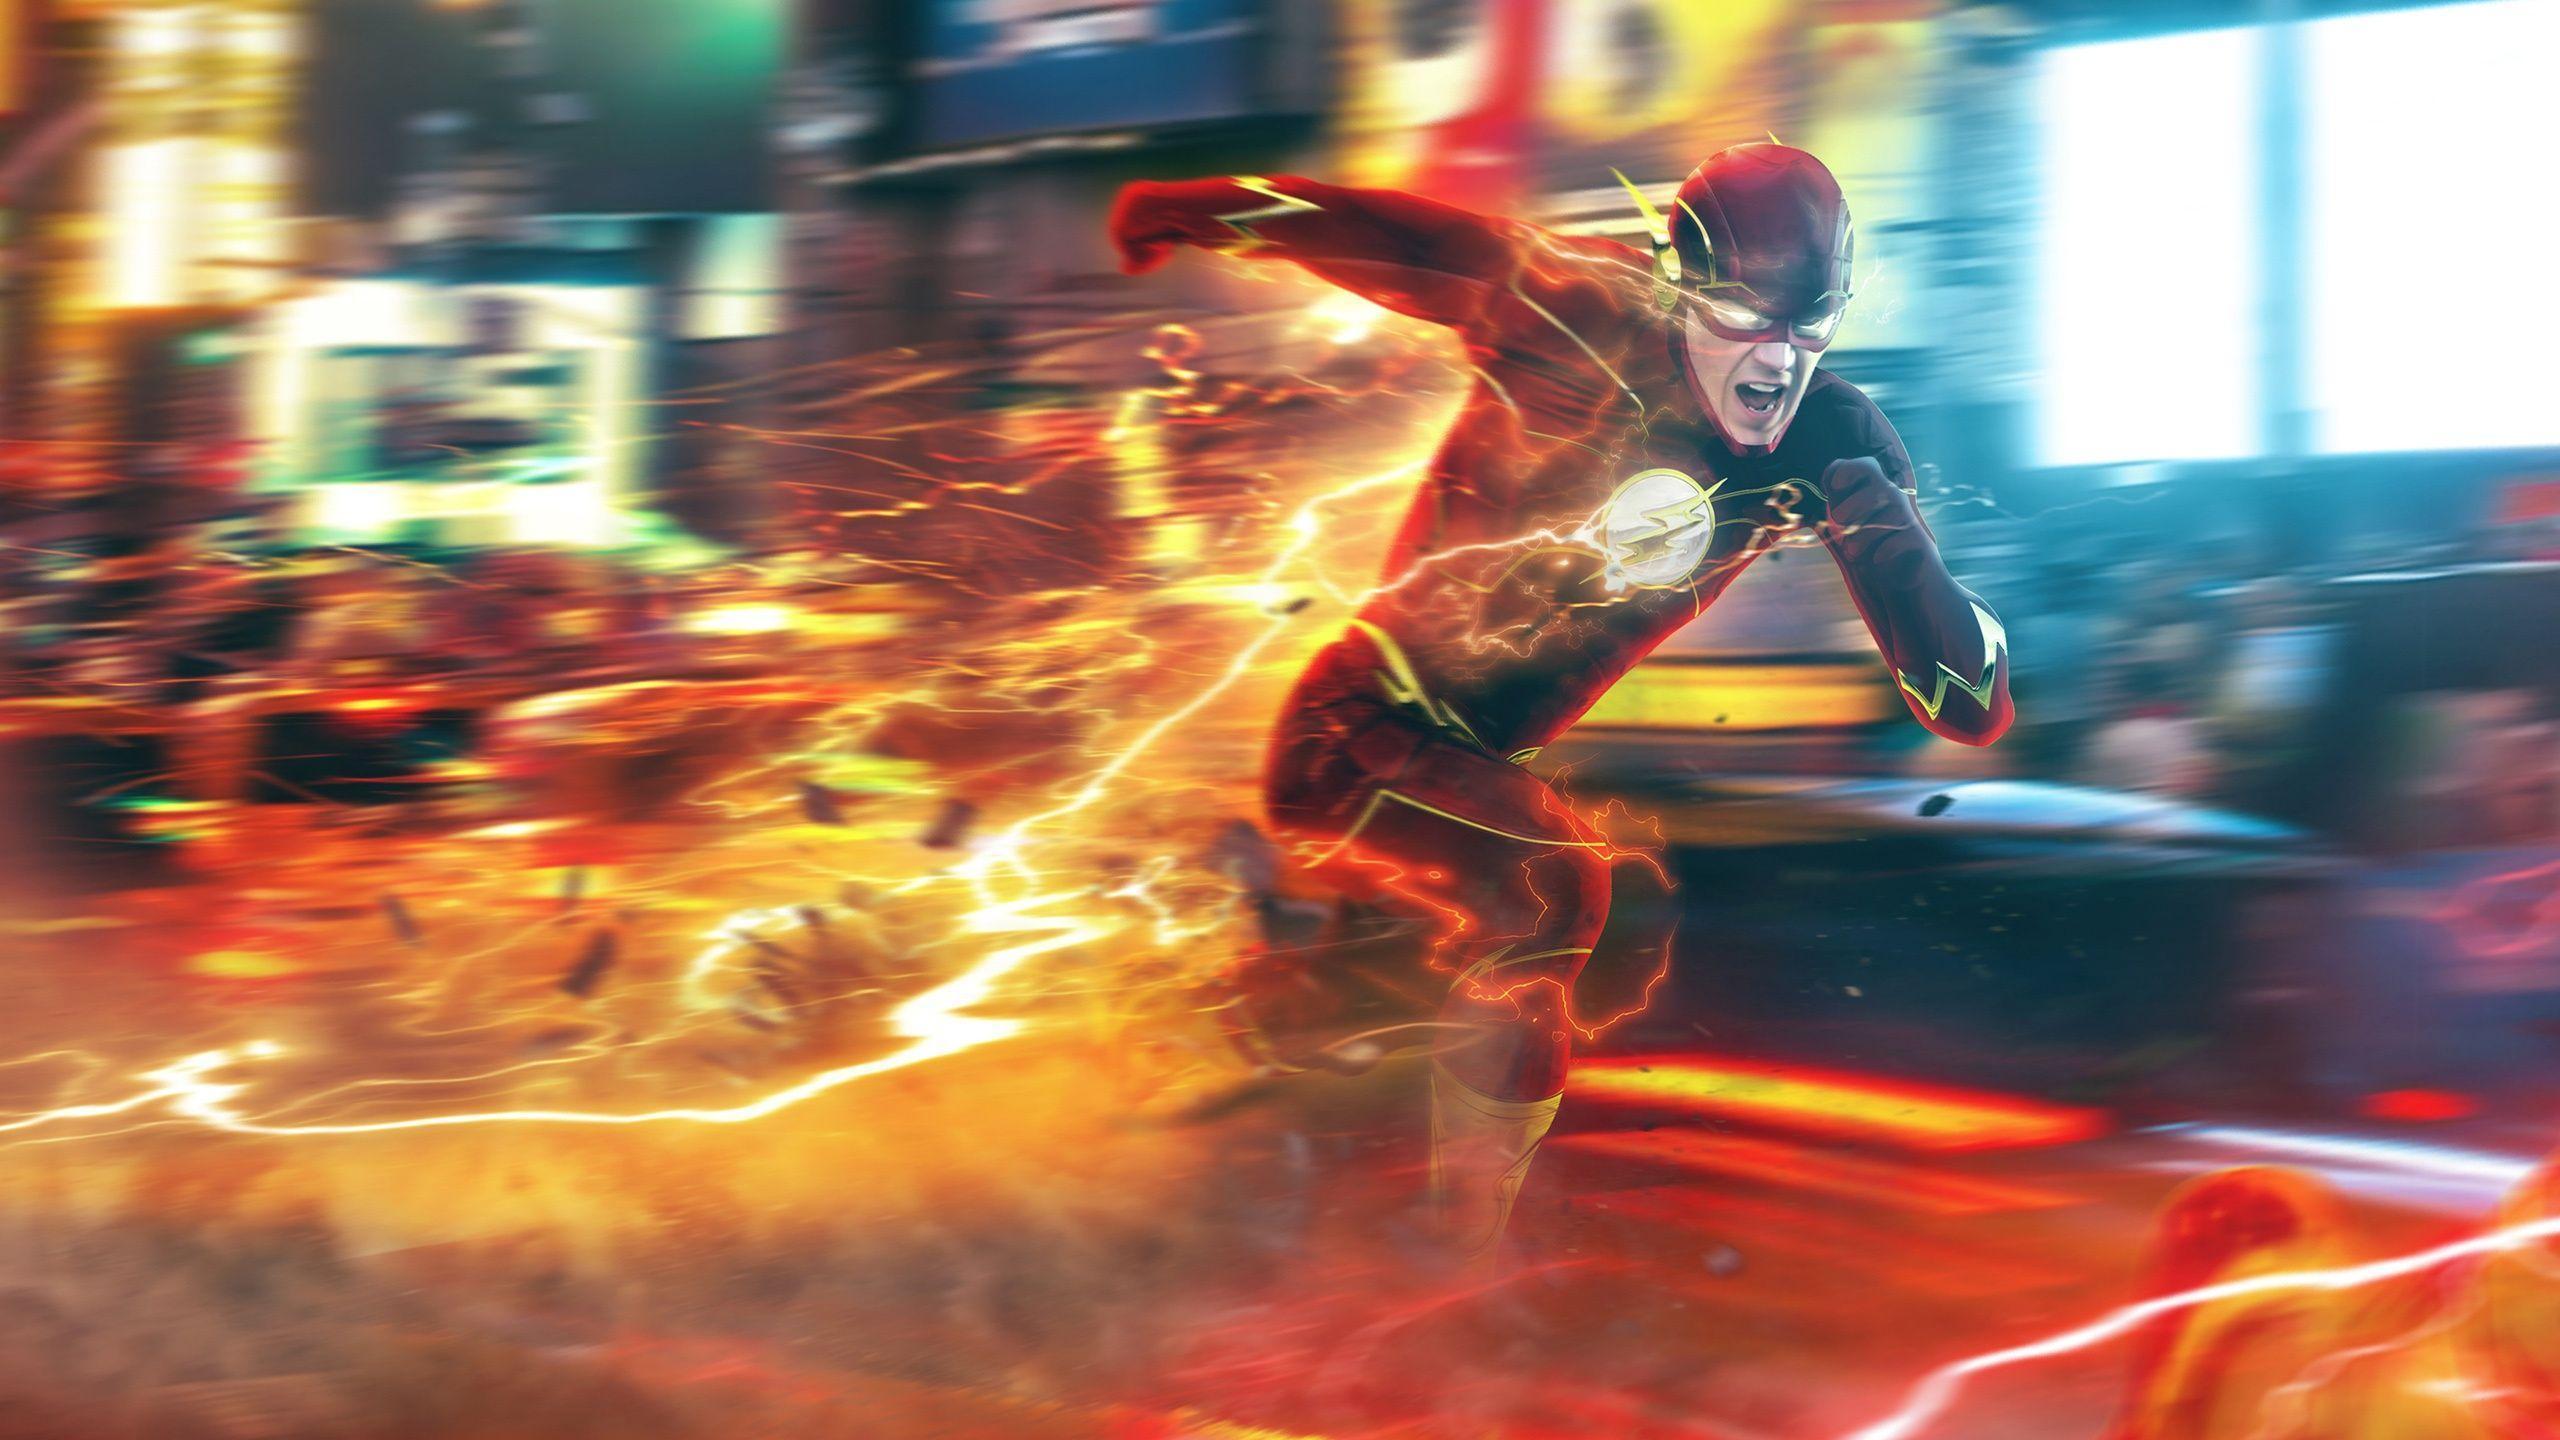 The Flash 2019 Wallpapers